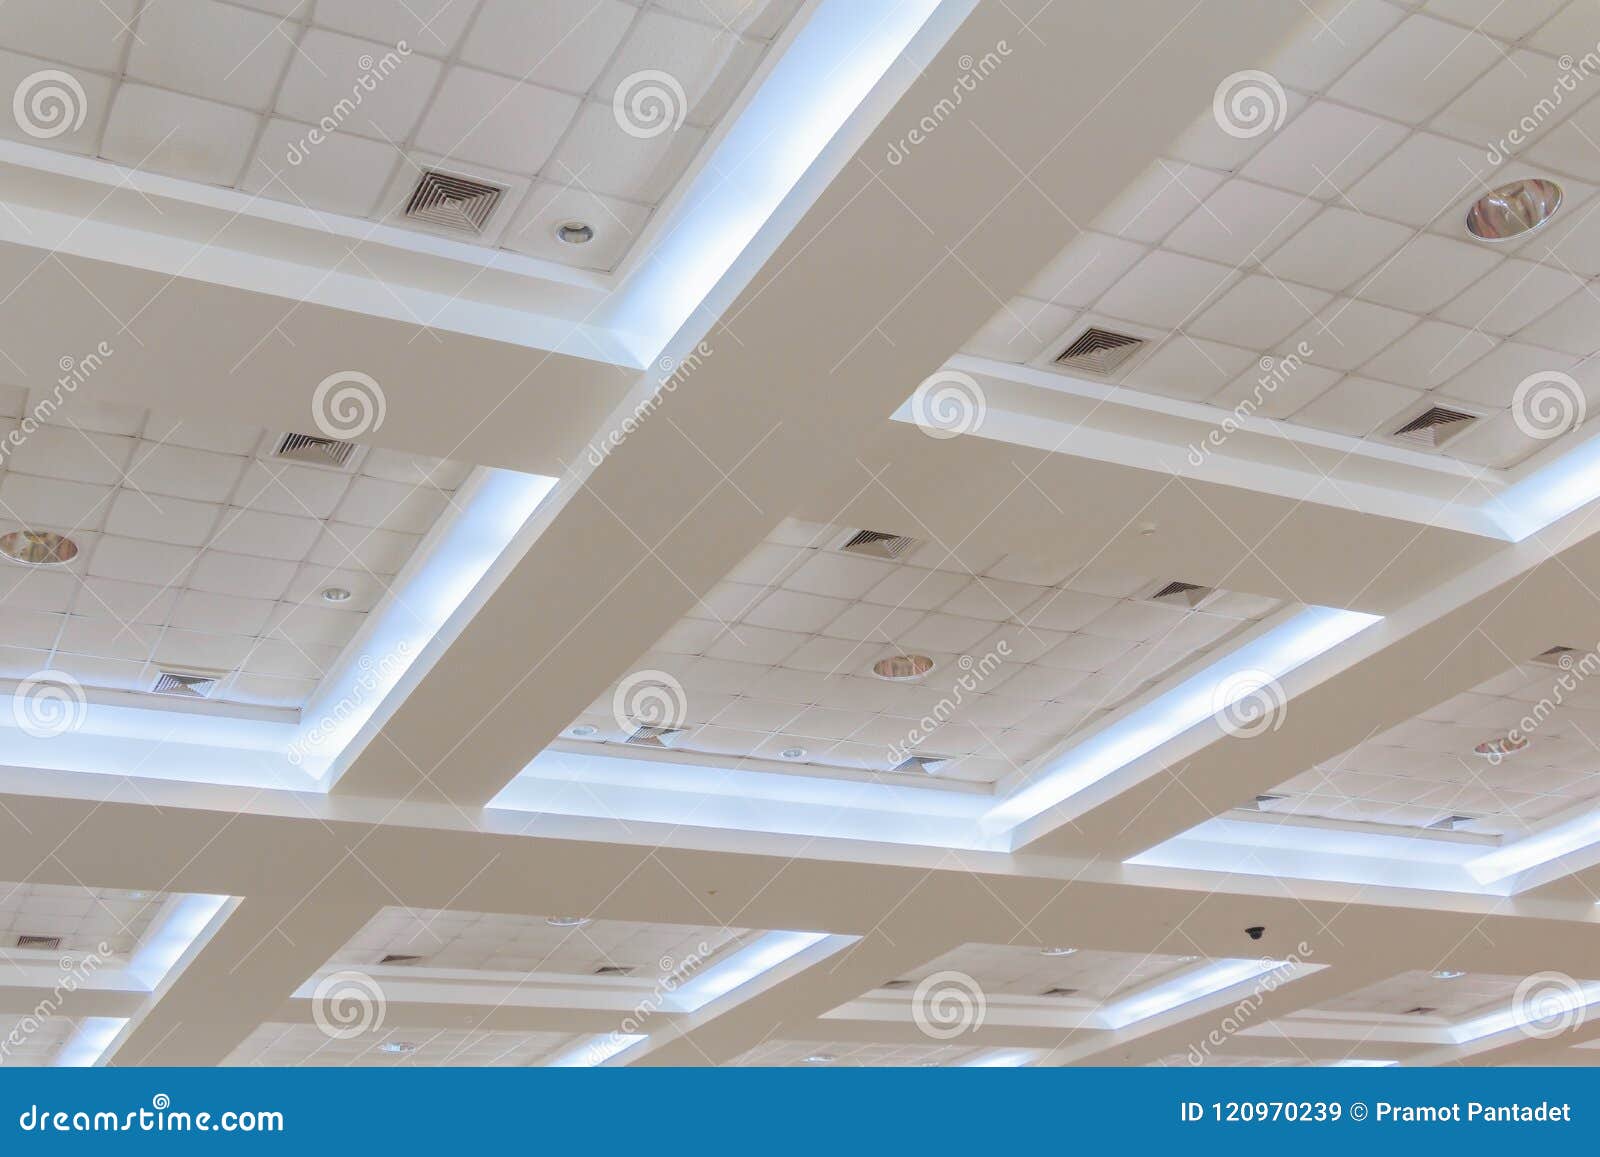 Ceiling Gypsum Of Business Interior Office Building And